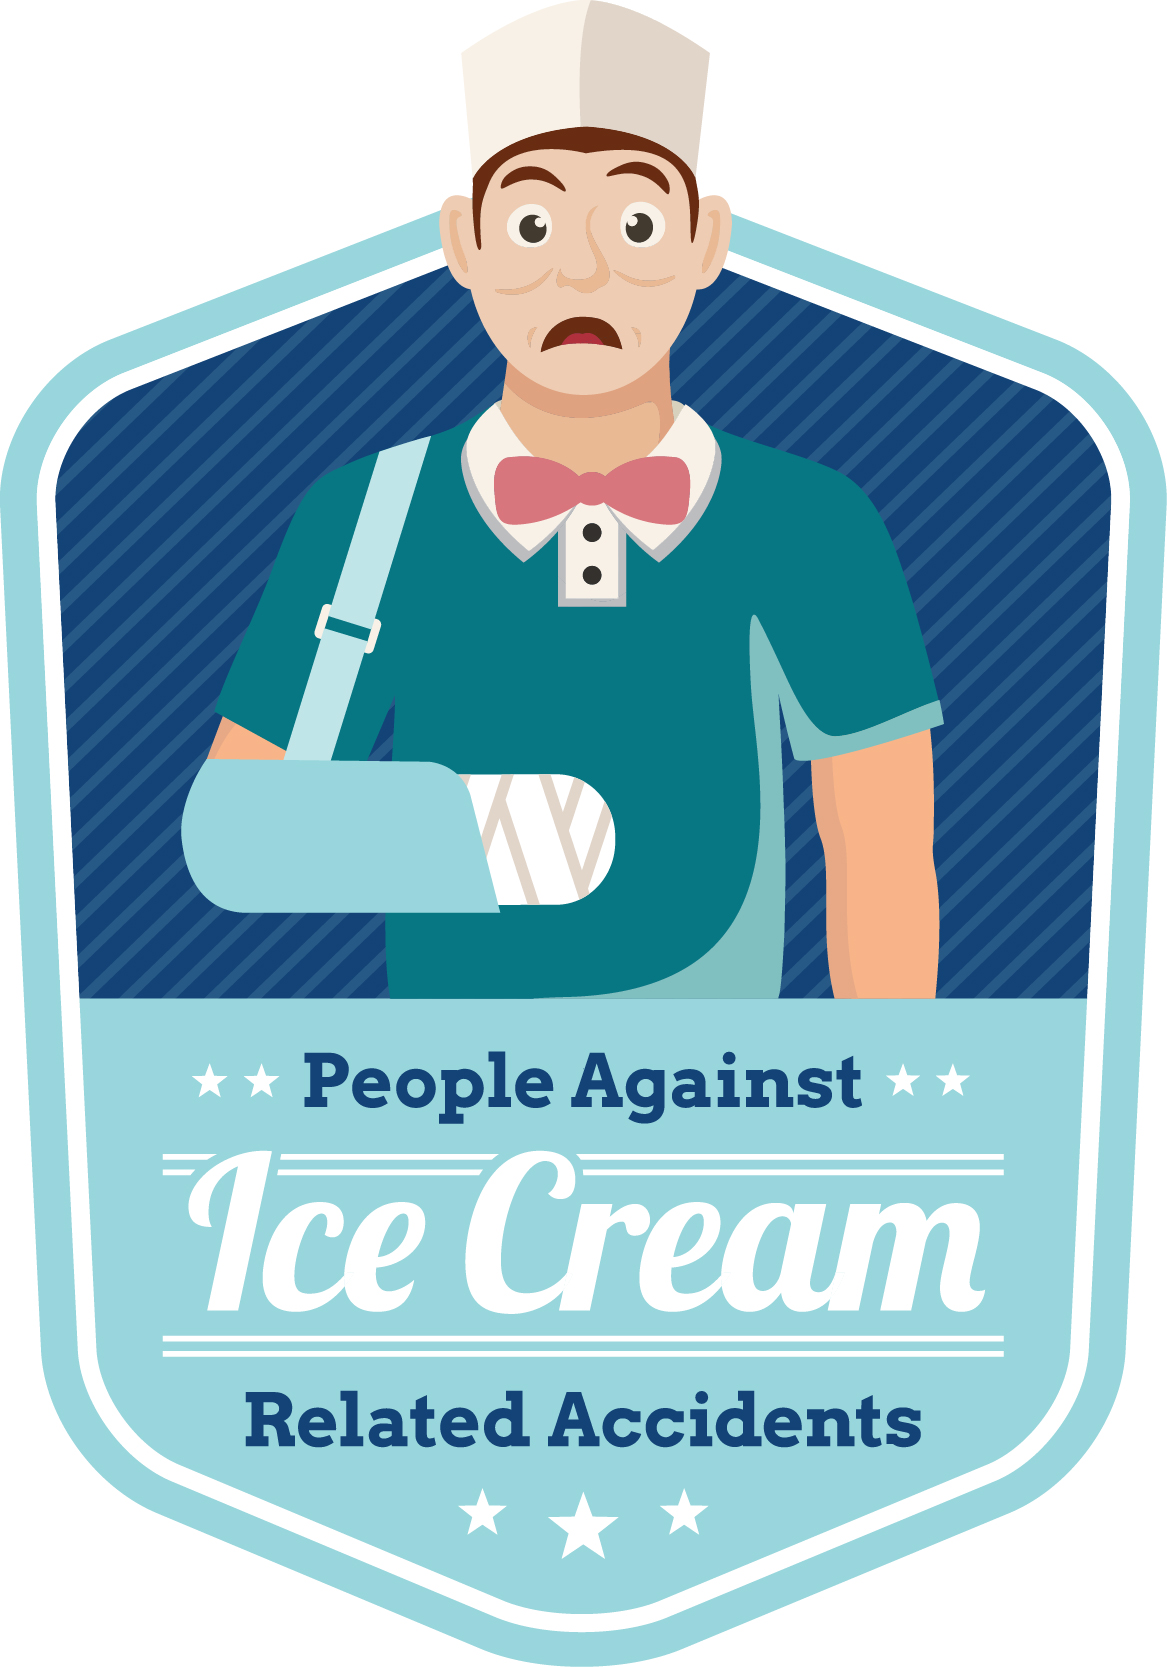 People Against Ice Cream Related Accidents